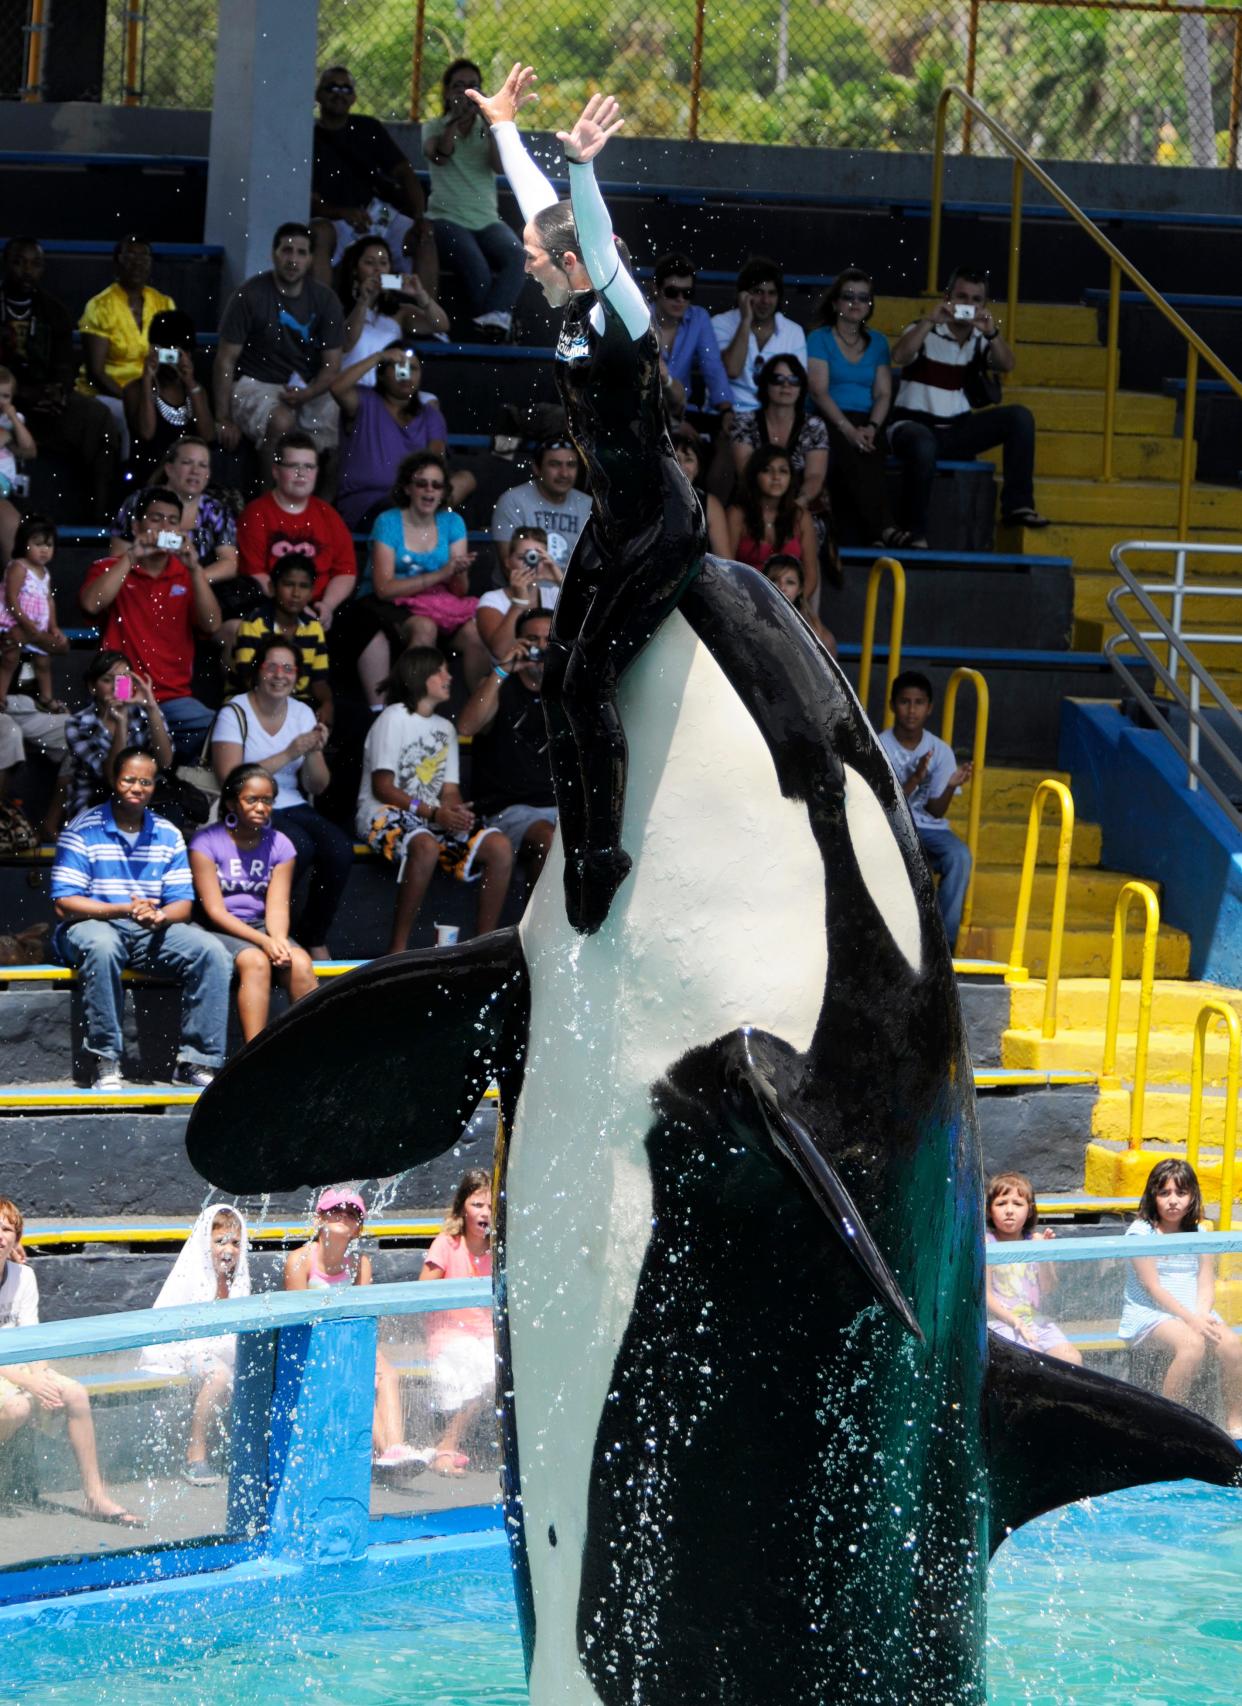 In this 2010 photo, Lolita, the Miami Seaquarium's killer whale, pushes trainer Heather Keenan into the air at the finale of her show. Earlier this year, the marine park said Lolita would no longer perform for the public.